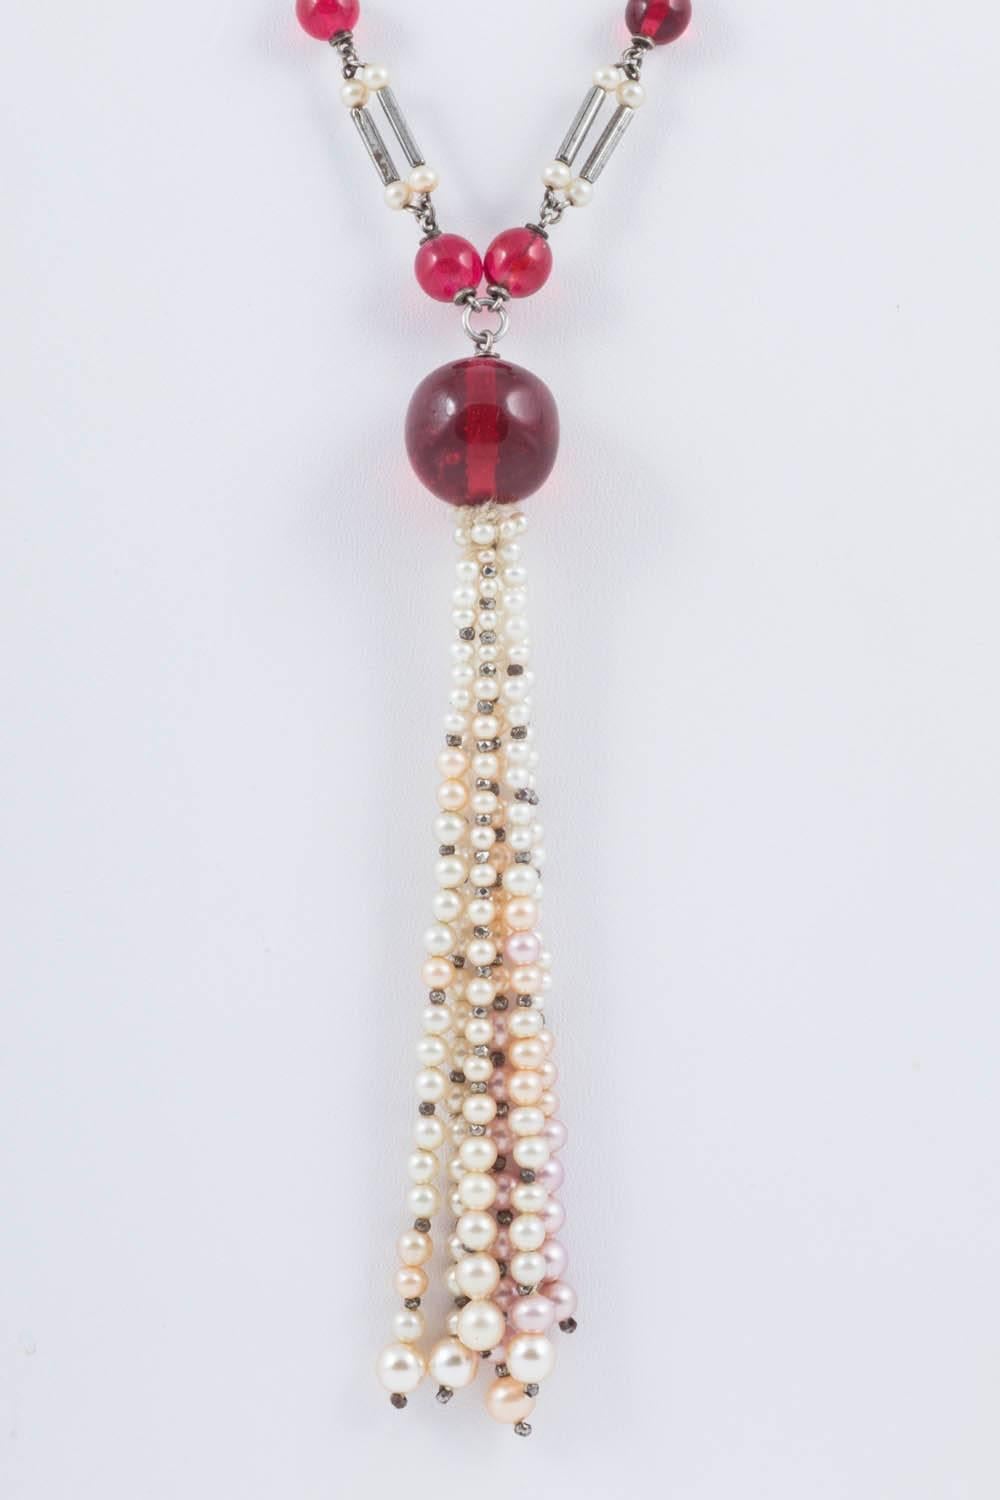 This necklace is possibly French, and has the beautiful cranberry glass bead work normally attributed to Louis Rousselet. As it has no clasp it is difficult to tell. The pearl tassel is interesting because the pearls are a softly graded mix of